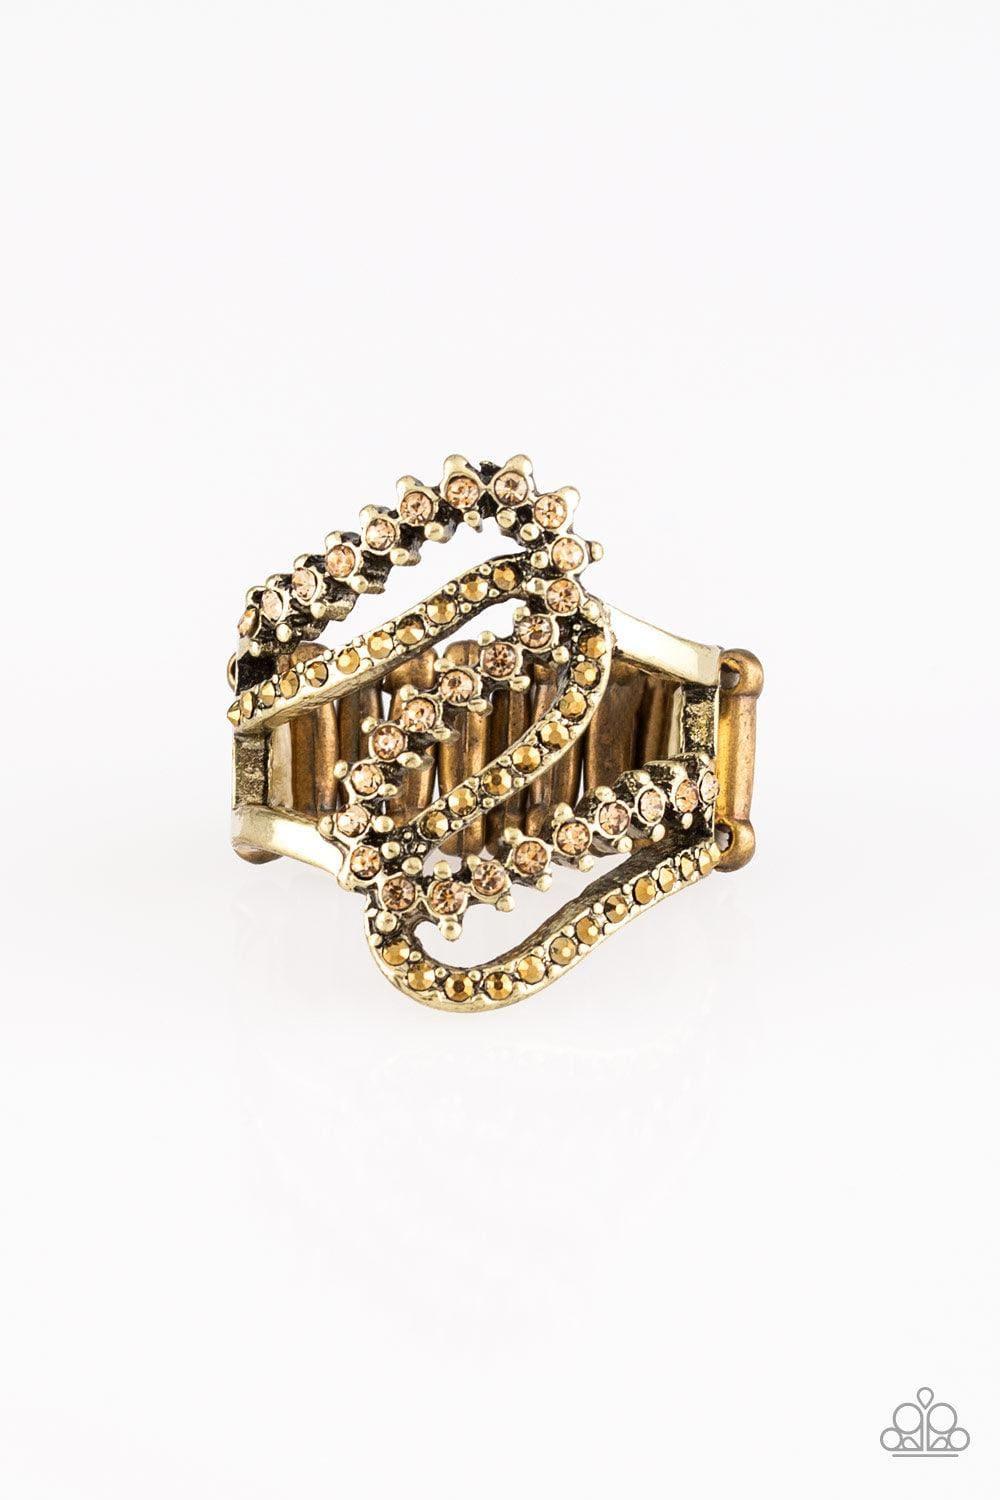 Paparazzi Accessories - Make Waves - Brass Ring - Bling by JessieK